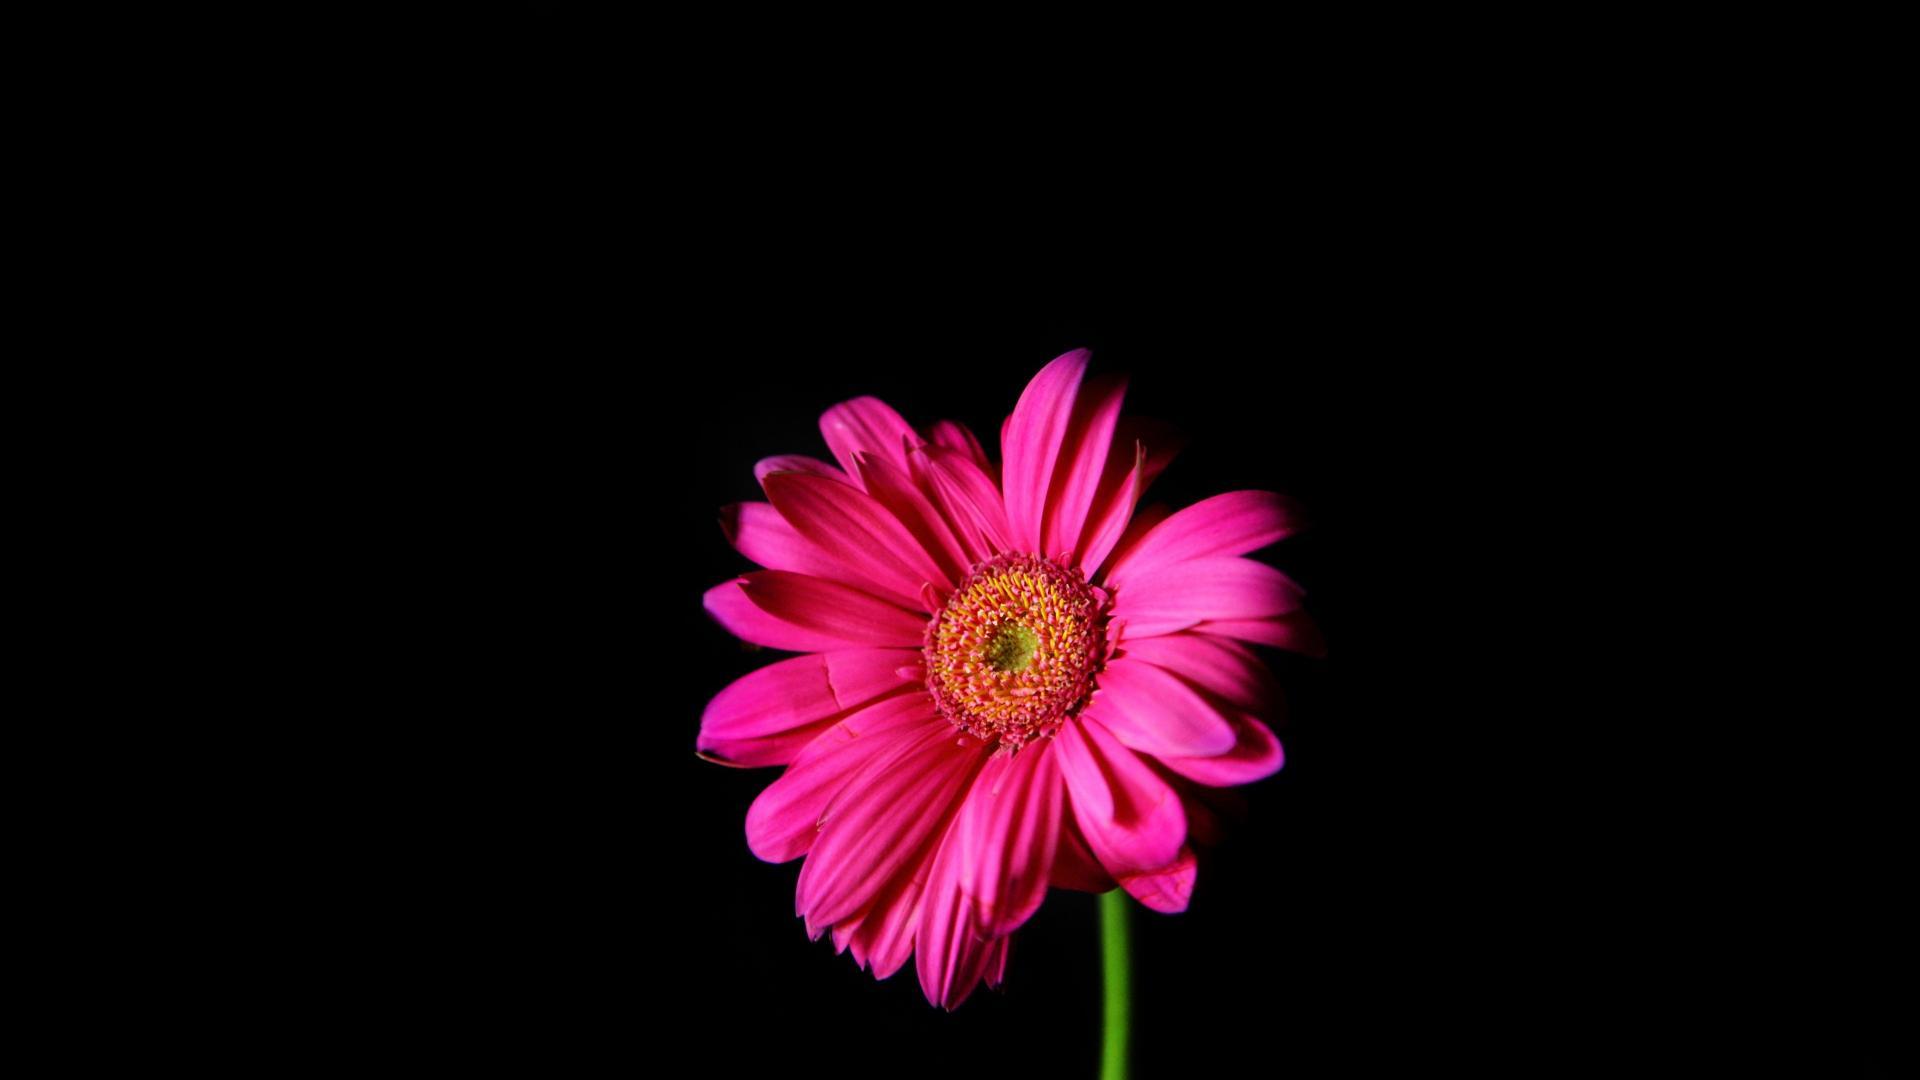 Pink And Black Flower Wallpapers - Wallpaper Cave